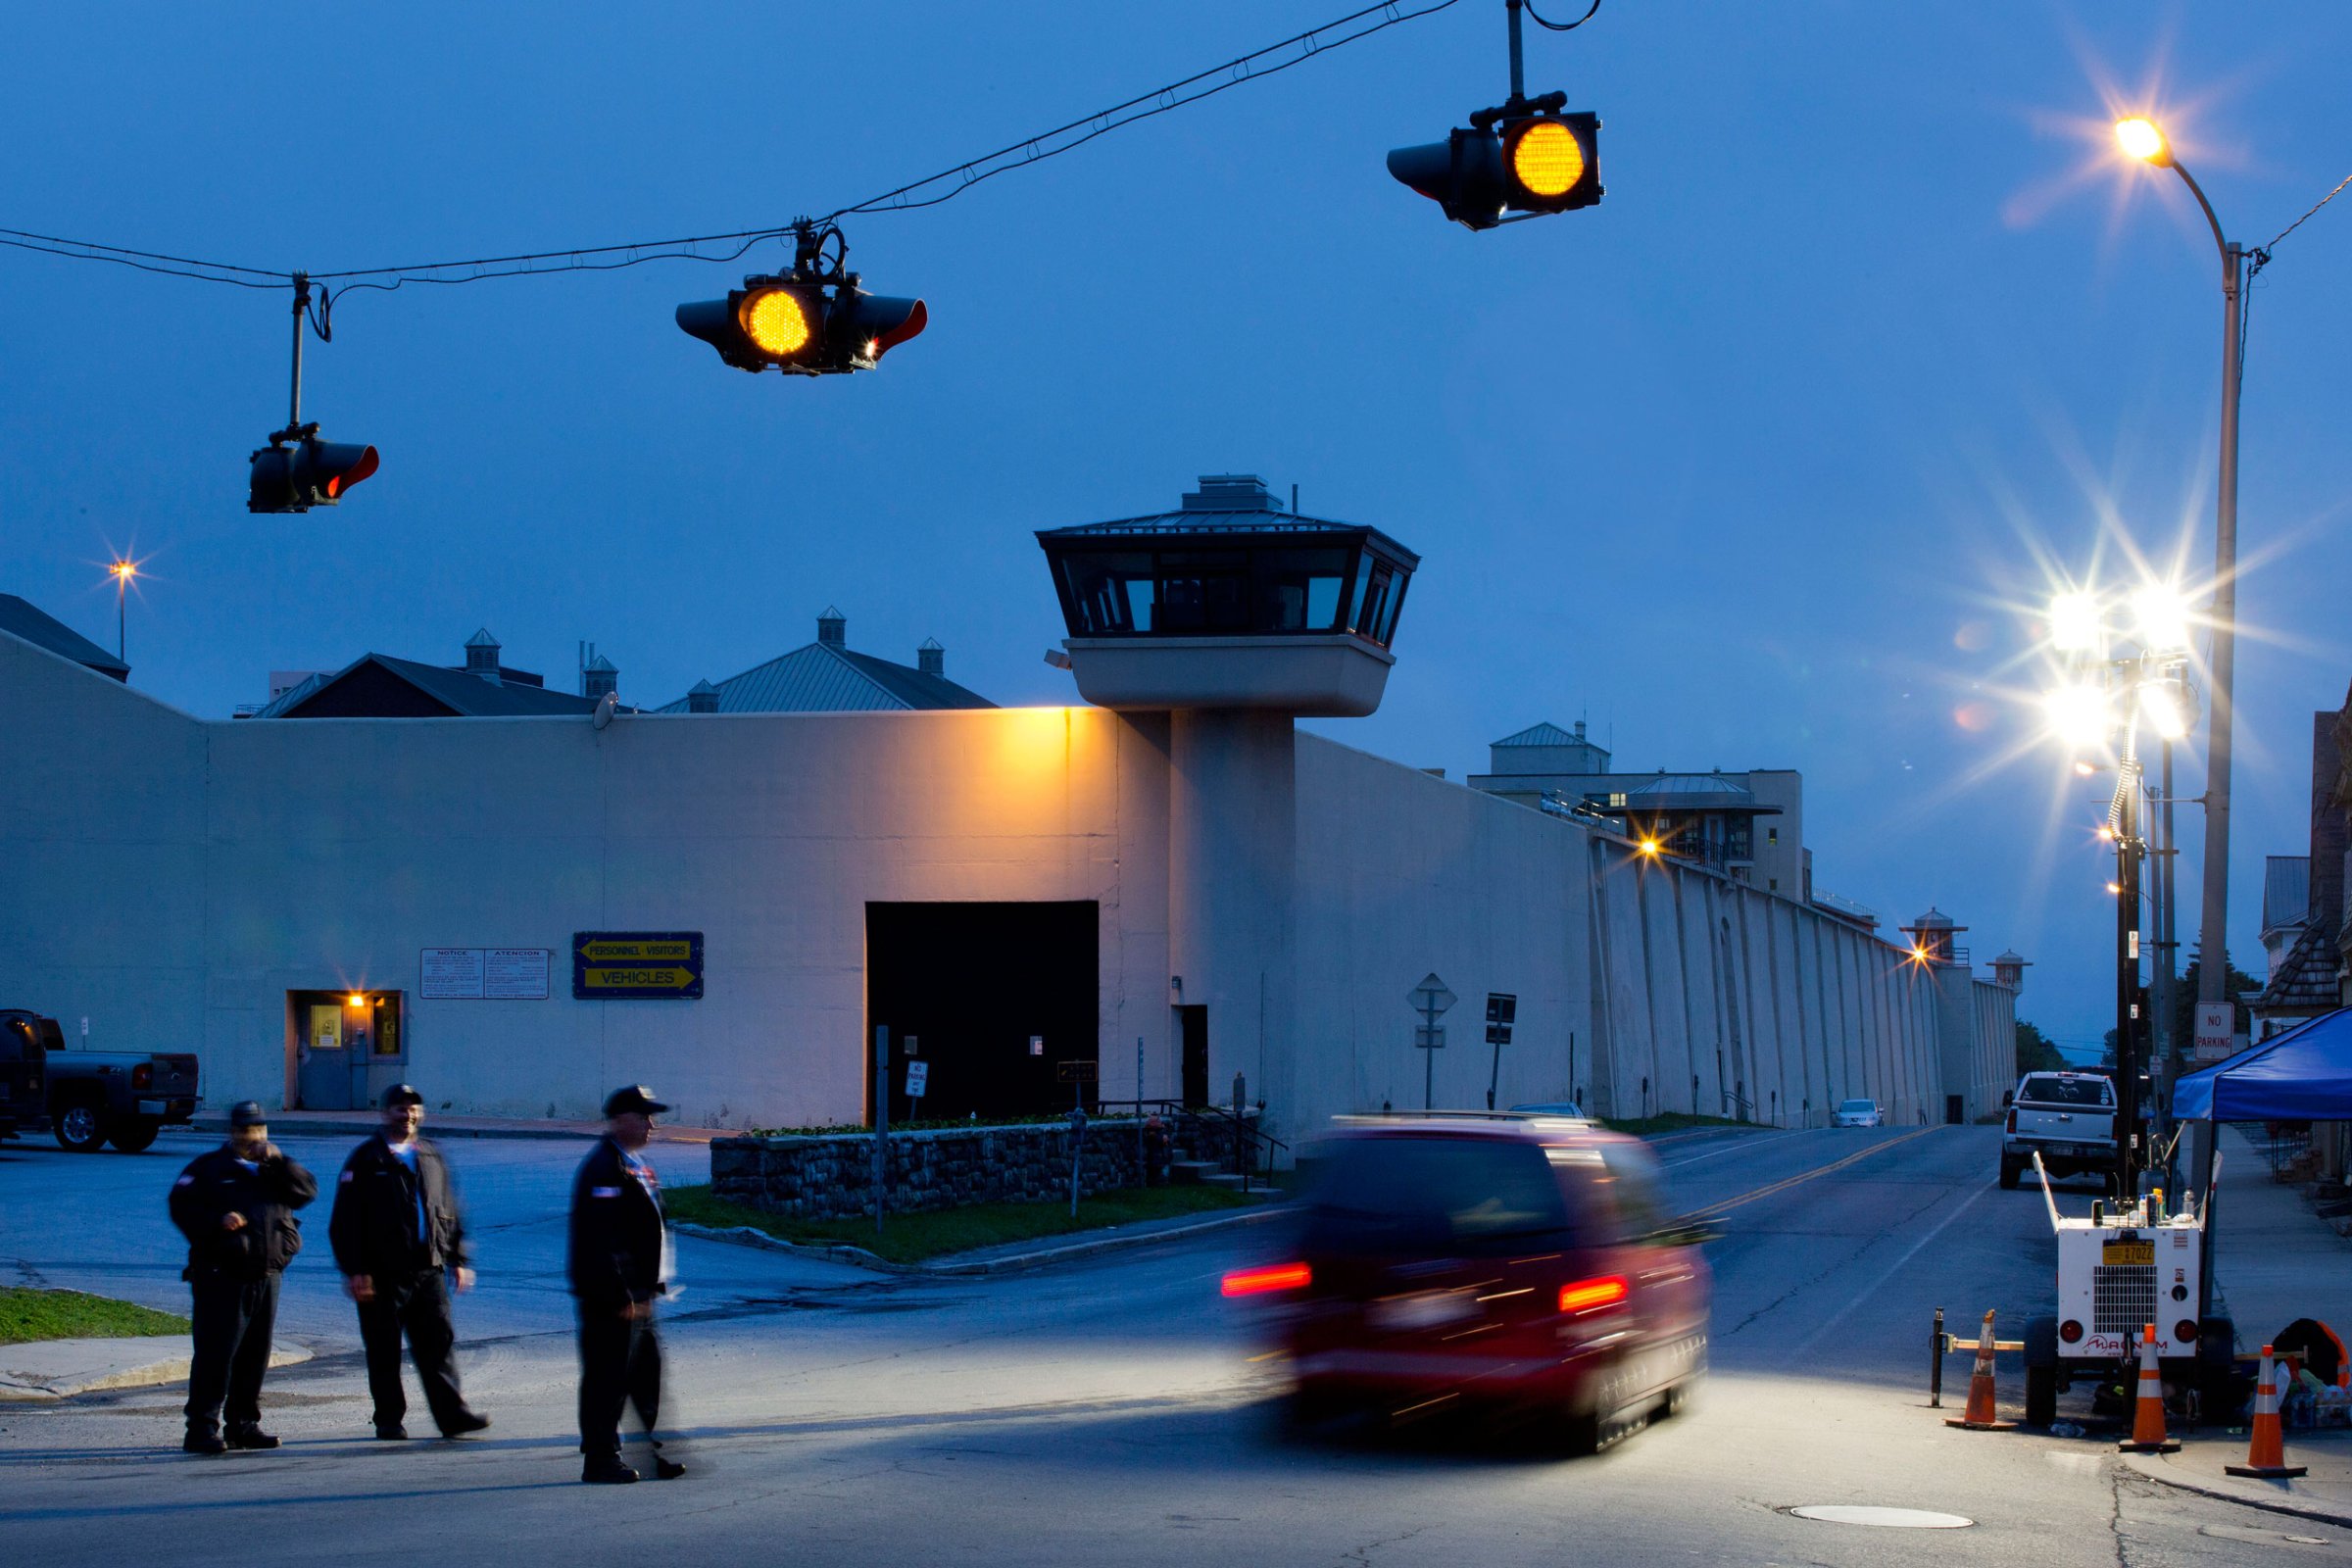 FILE - In this June 15, 2015, file photo, corrections officers watch an intersection in front of Clinton Correctional Facility in Dannemora, N.Y. David Sweat and Richard Matt escaped from the prison June 6. Sweat was captured on Sunday, June 28; Matt was shot and killed Friday June 26. (AP Photo/Mark Lennihan, File)